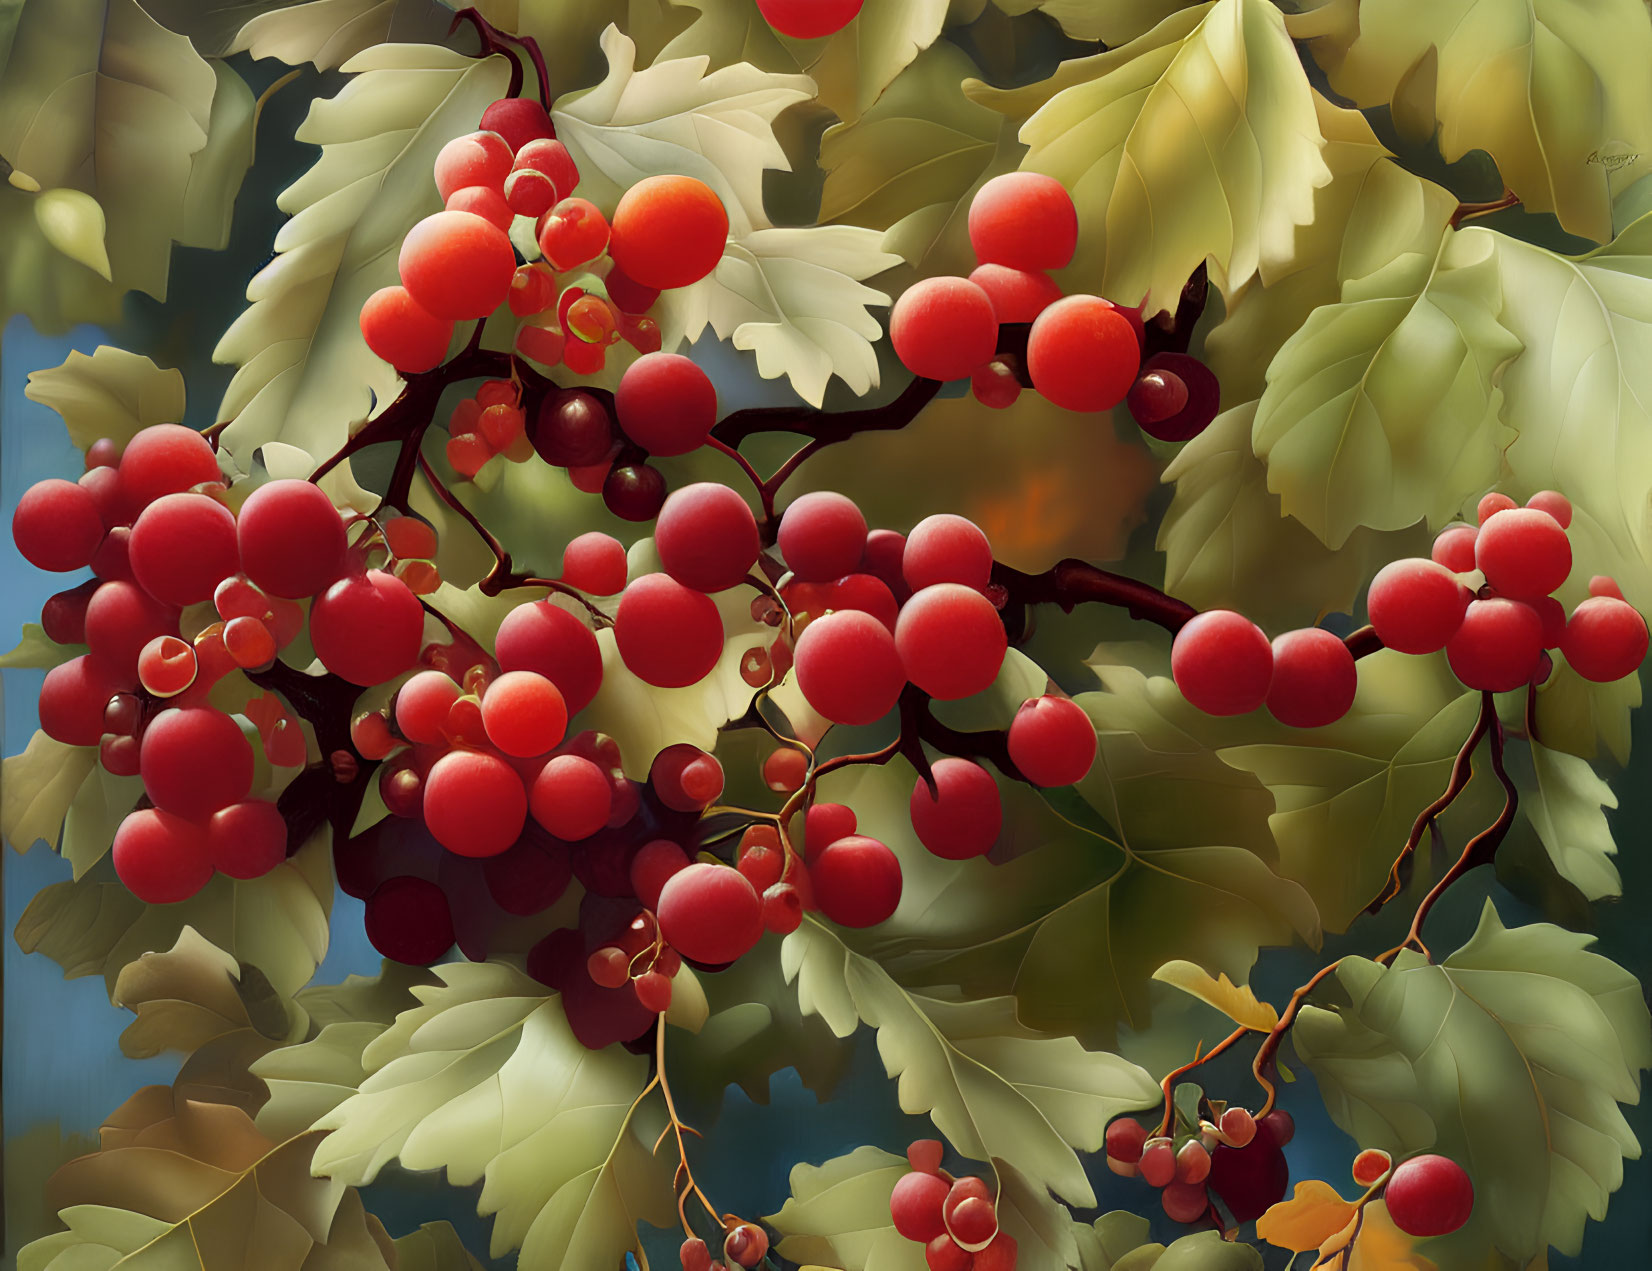 Clustered vivid red berries on lush green leaves with soft-focus background